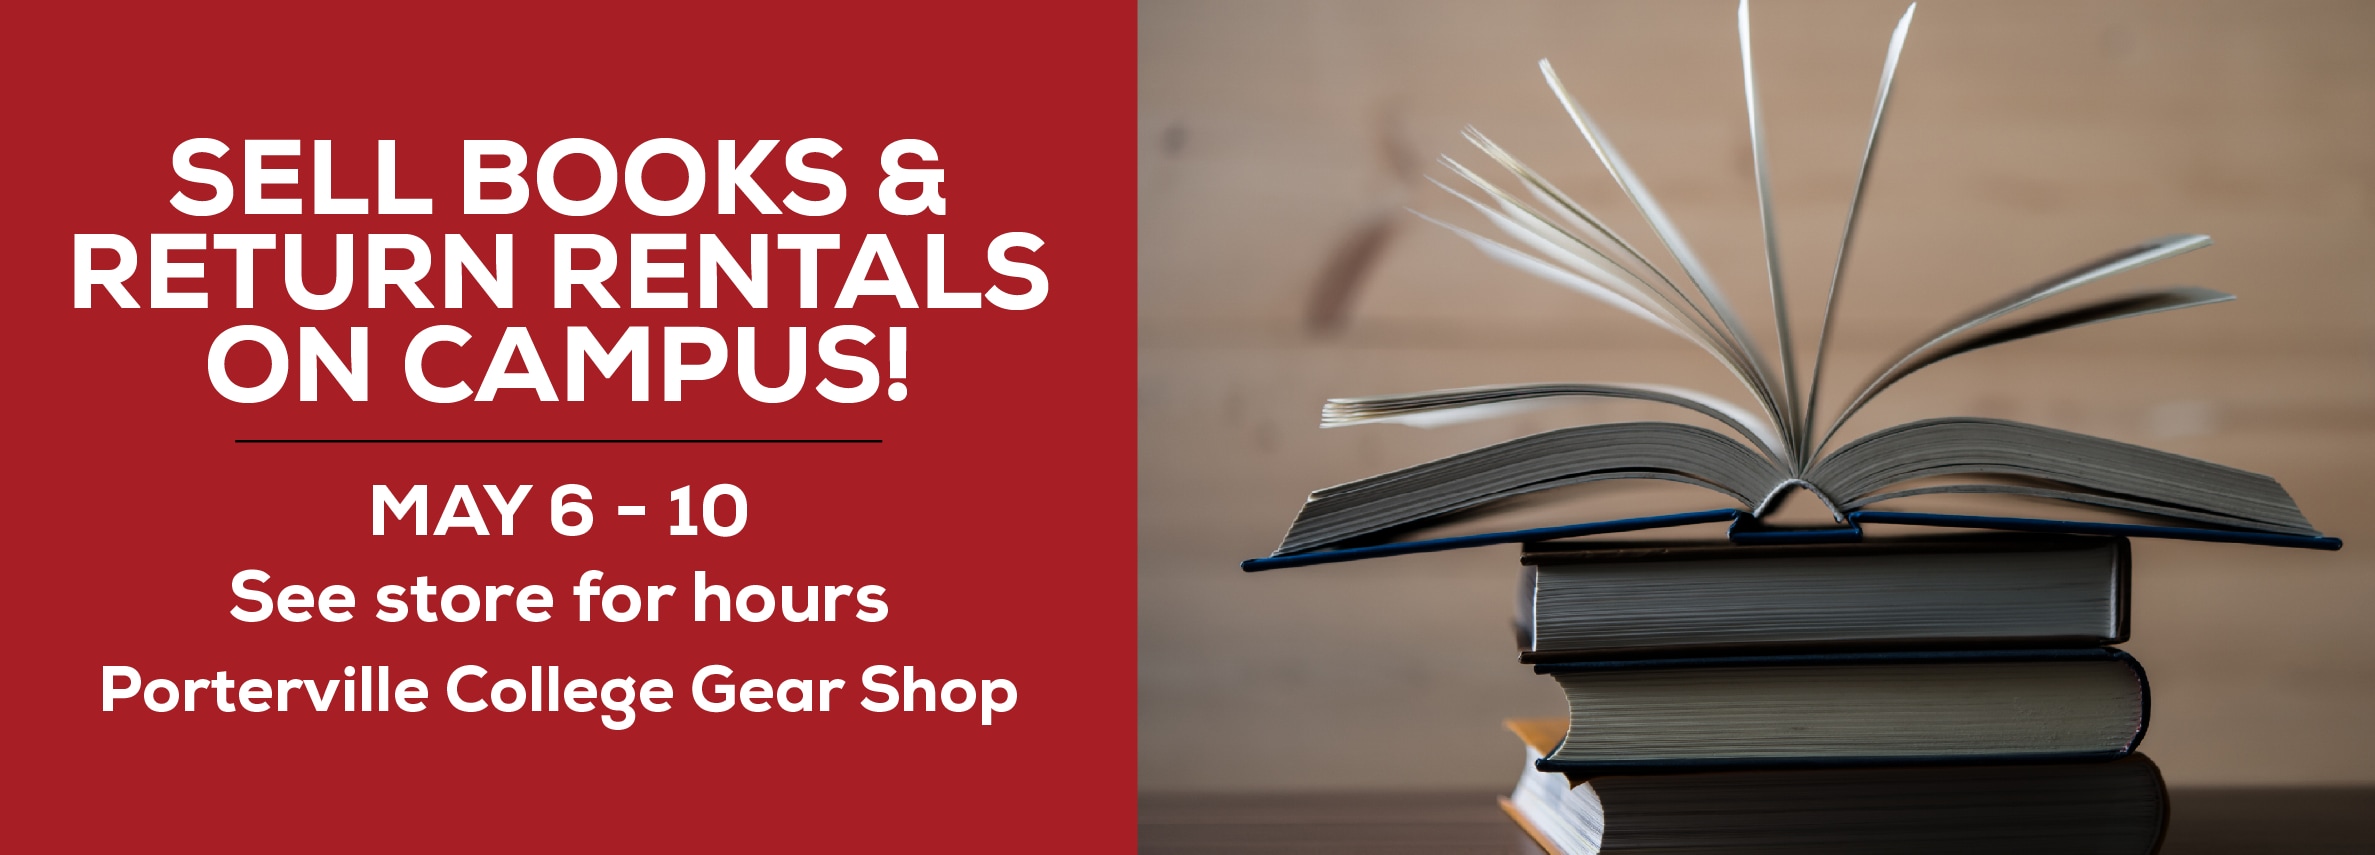 Sell books and return rentals on campus! May 6 - 10. See store for hours. Porterville College Gear Shop